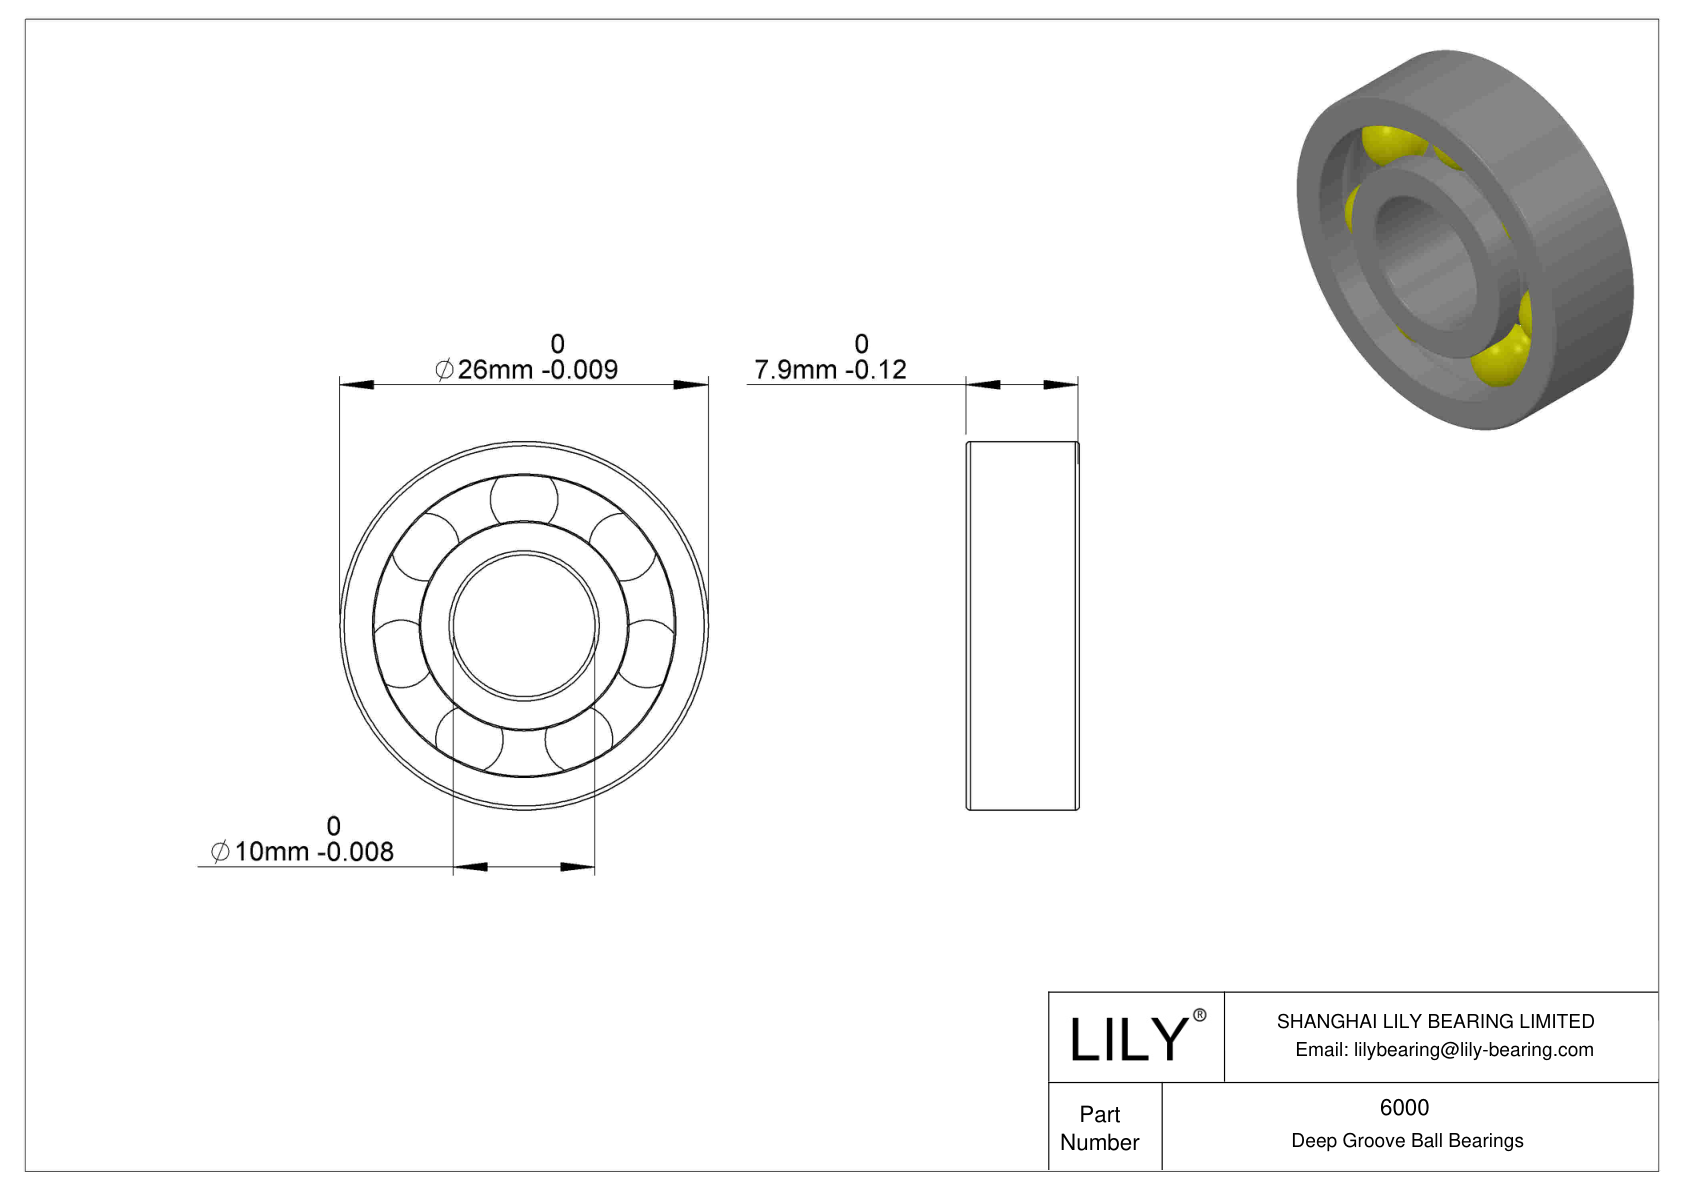 LILY-BS600030-11 POM Coated Bearing cad drawing